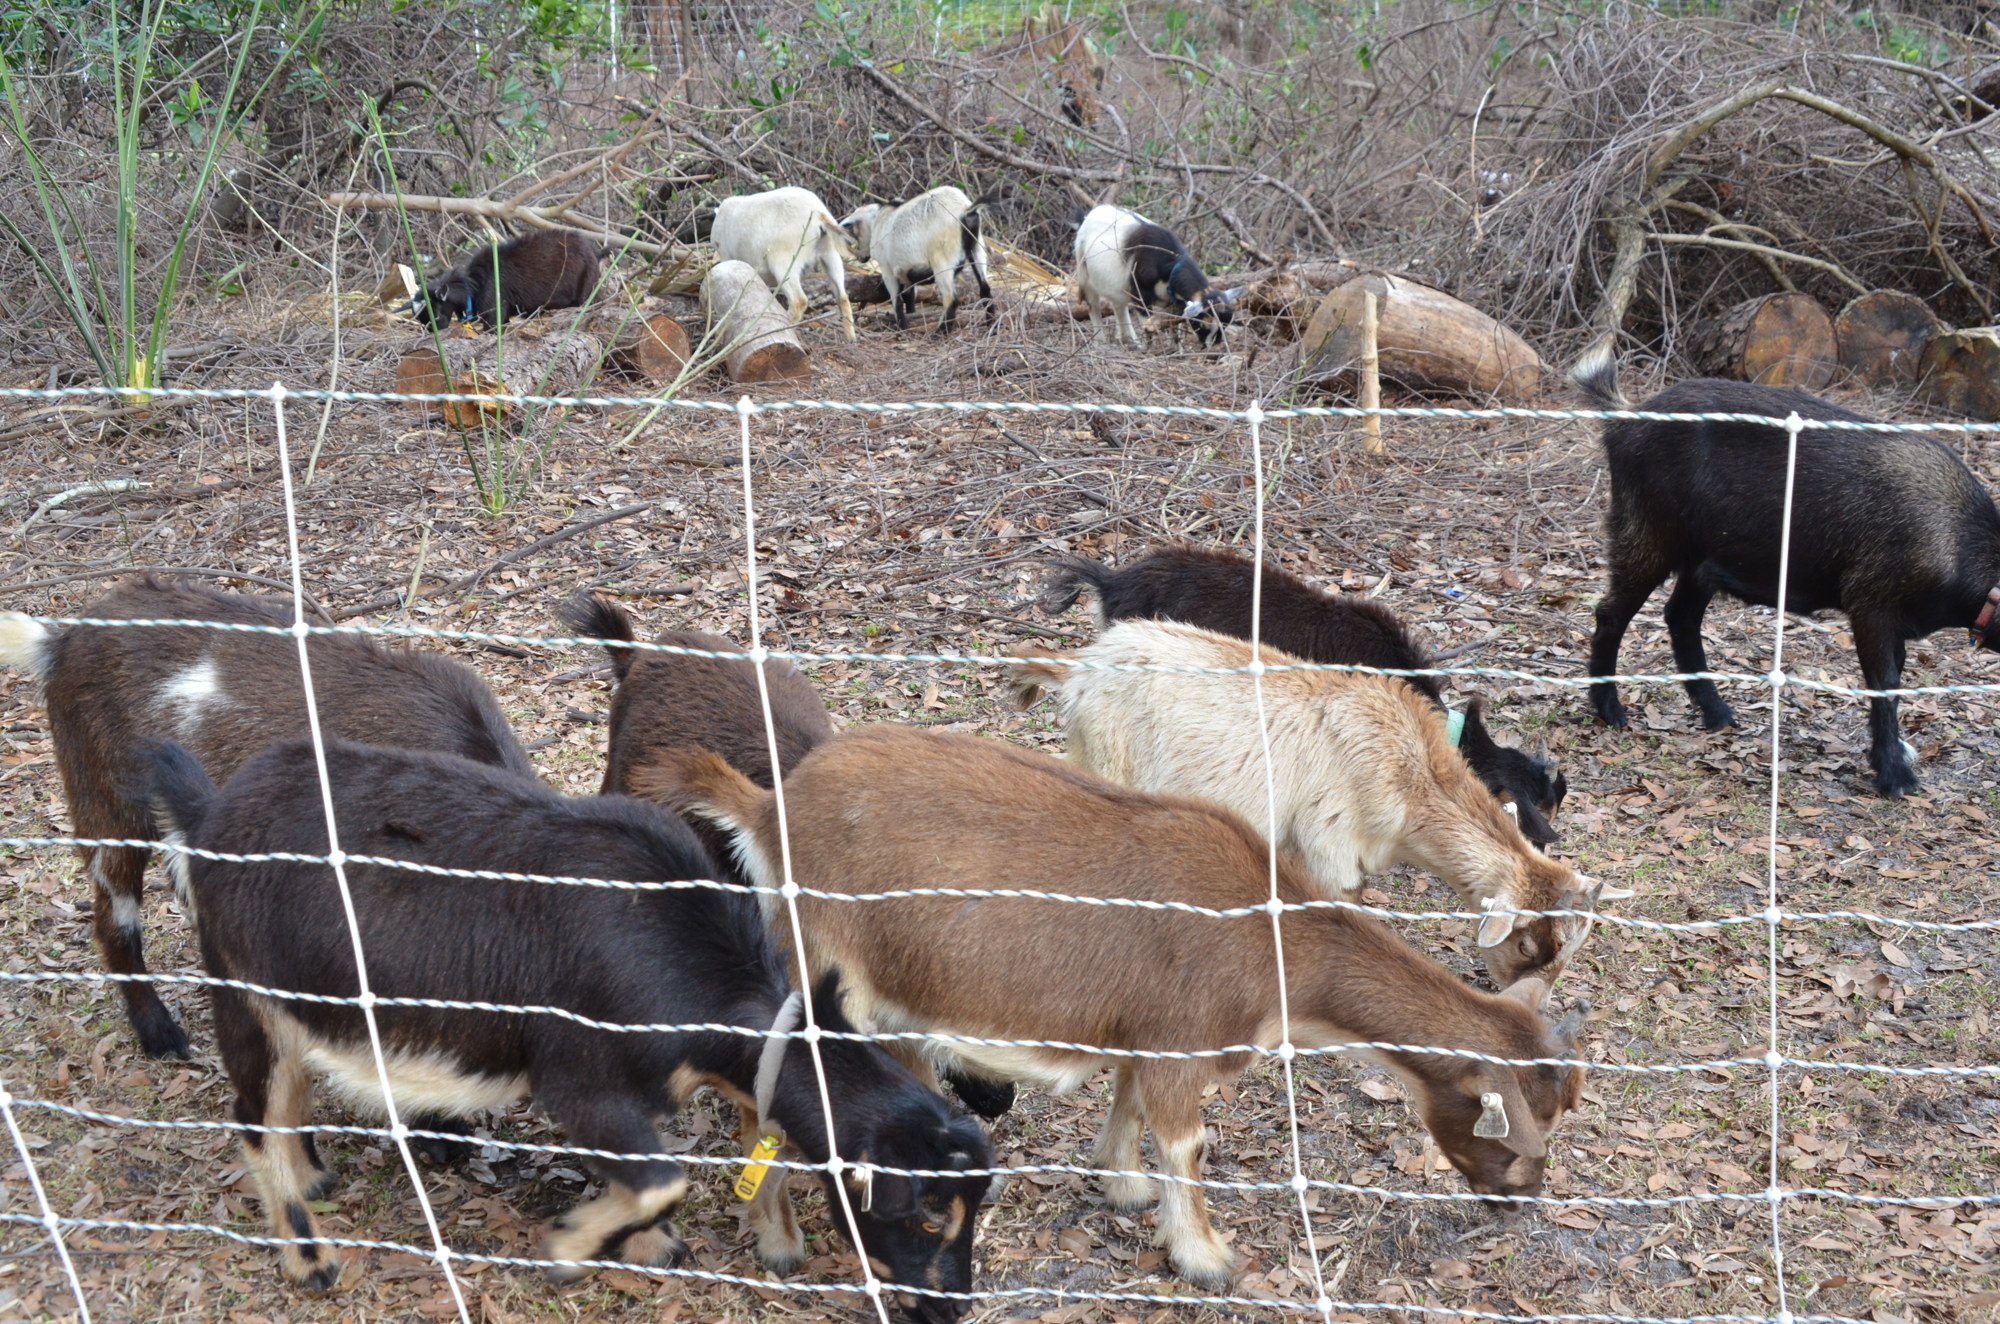 A herd of 25 goats has nearly stripped away all the invasive species in this portion of the Silver Woods community entrance.